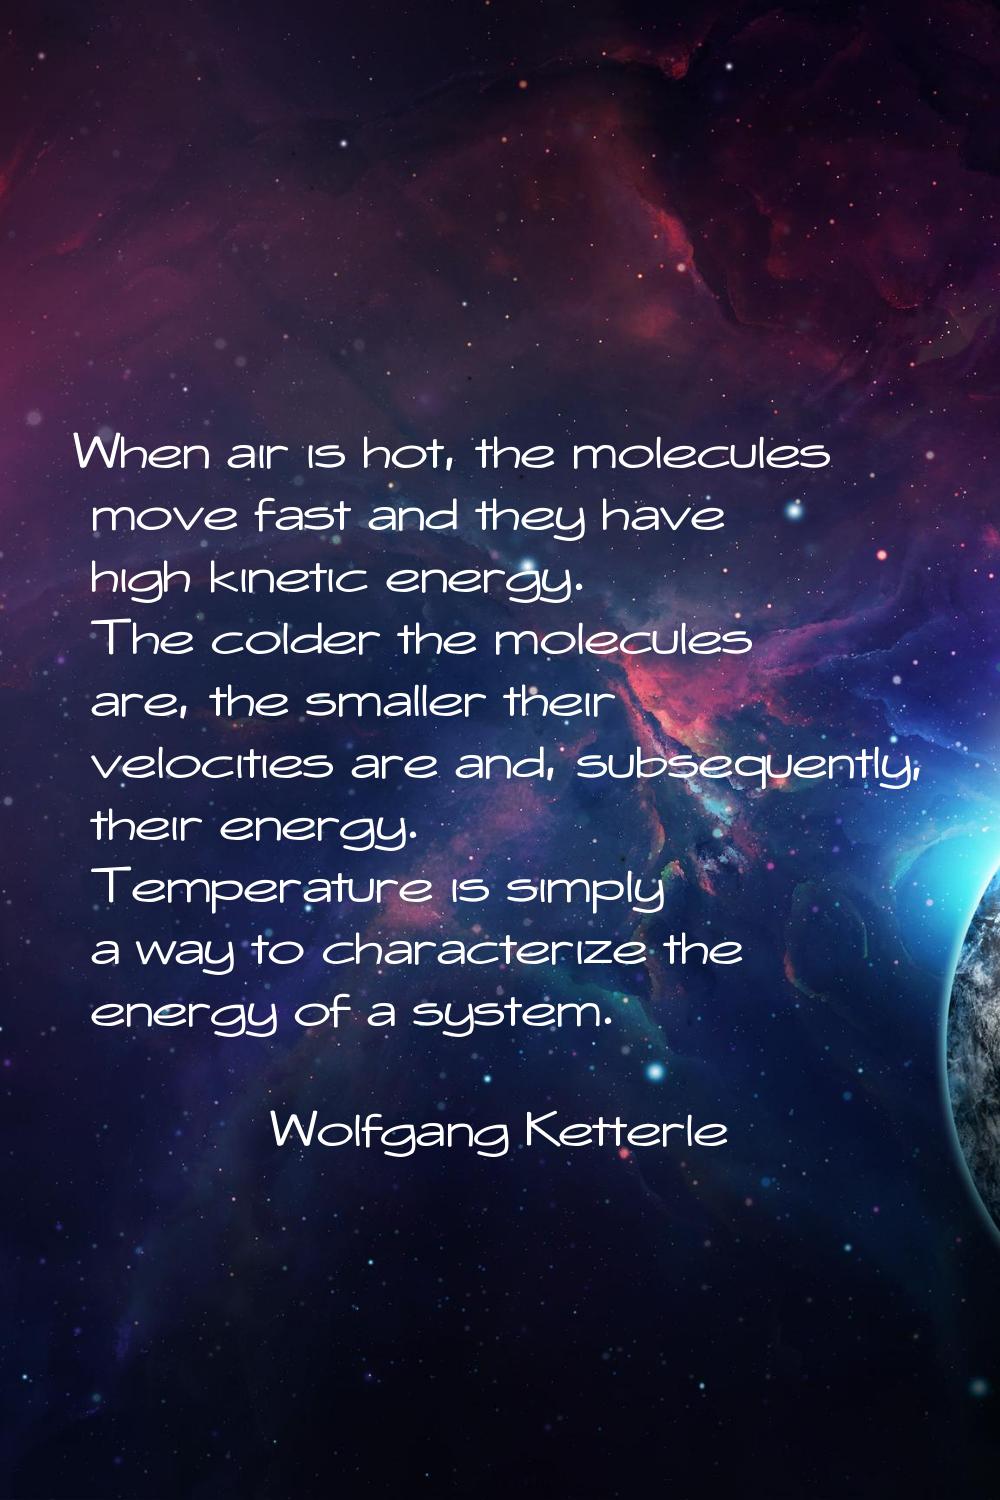 When air is hot, the molecules move fast and they have high kinetic energy. The colder the molecule